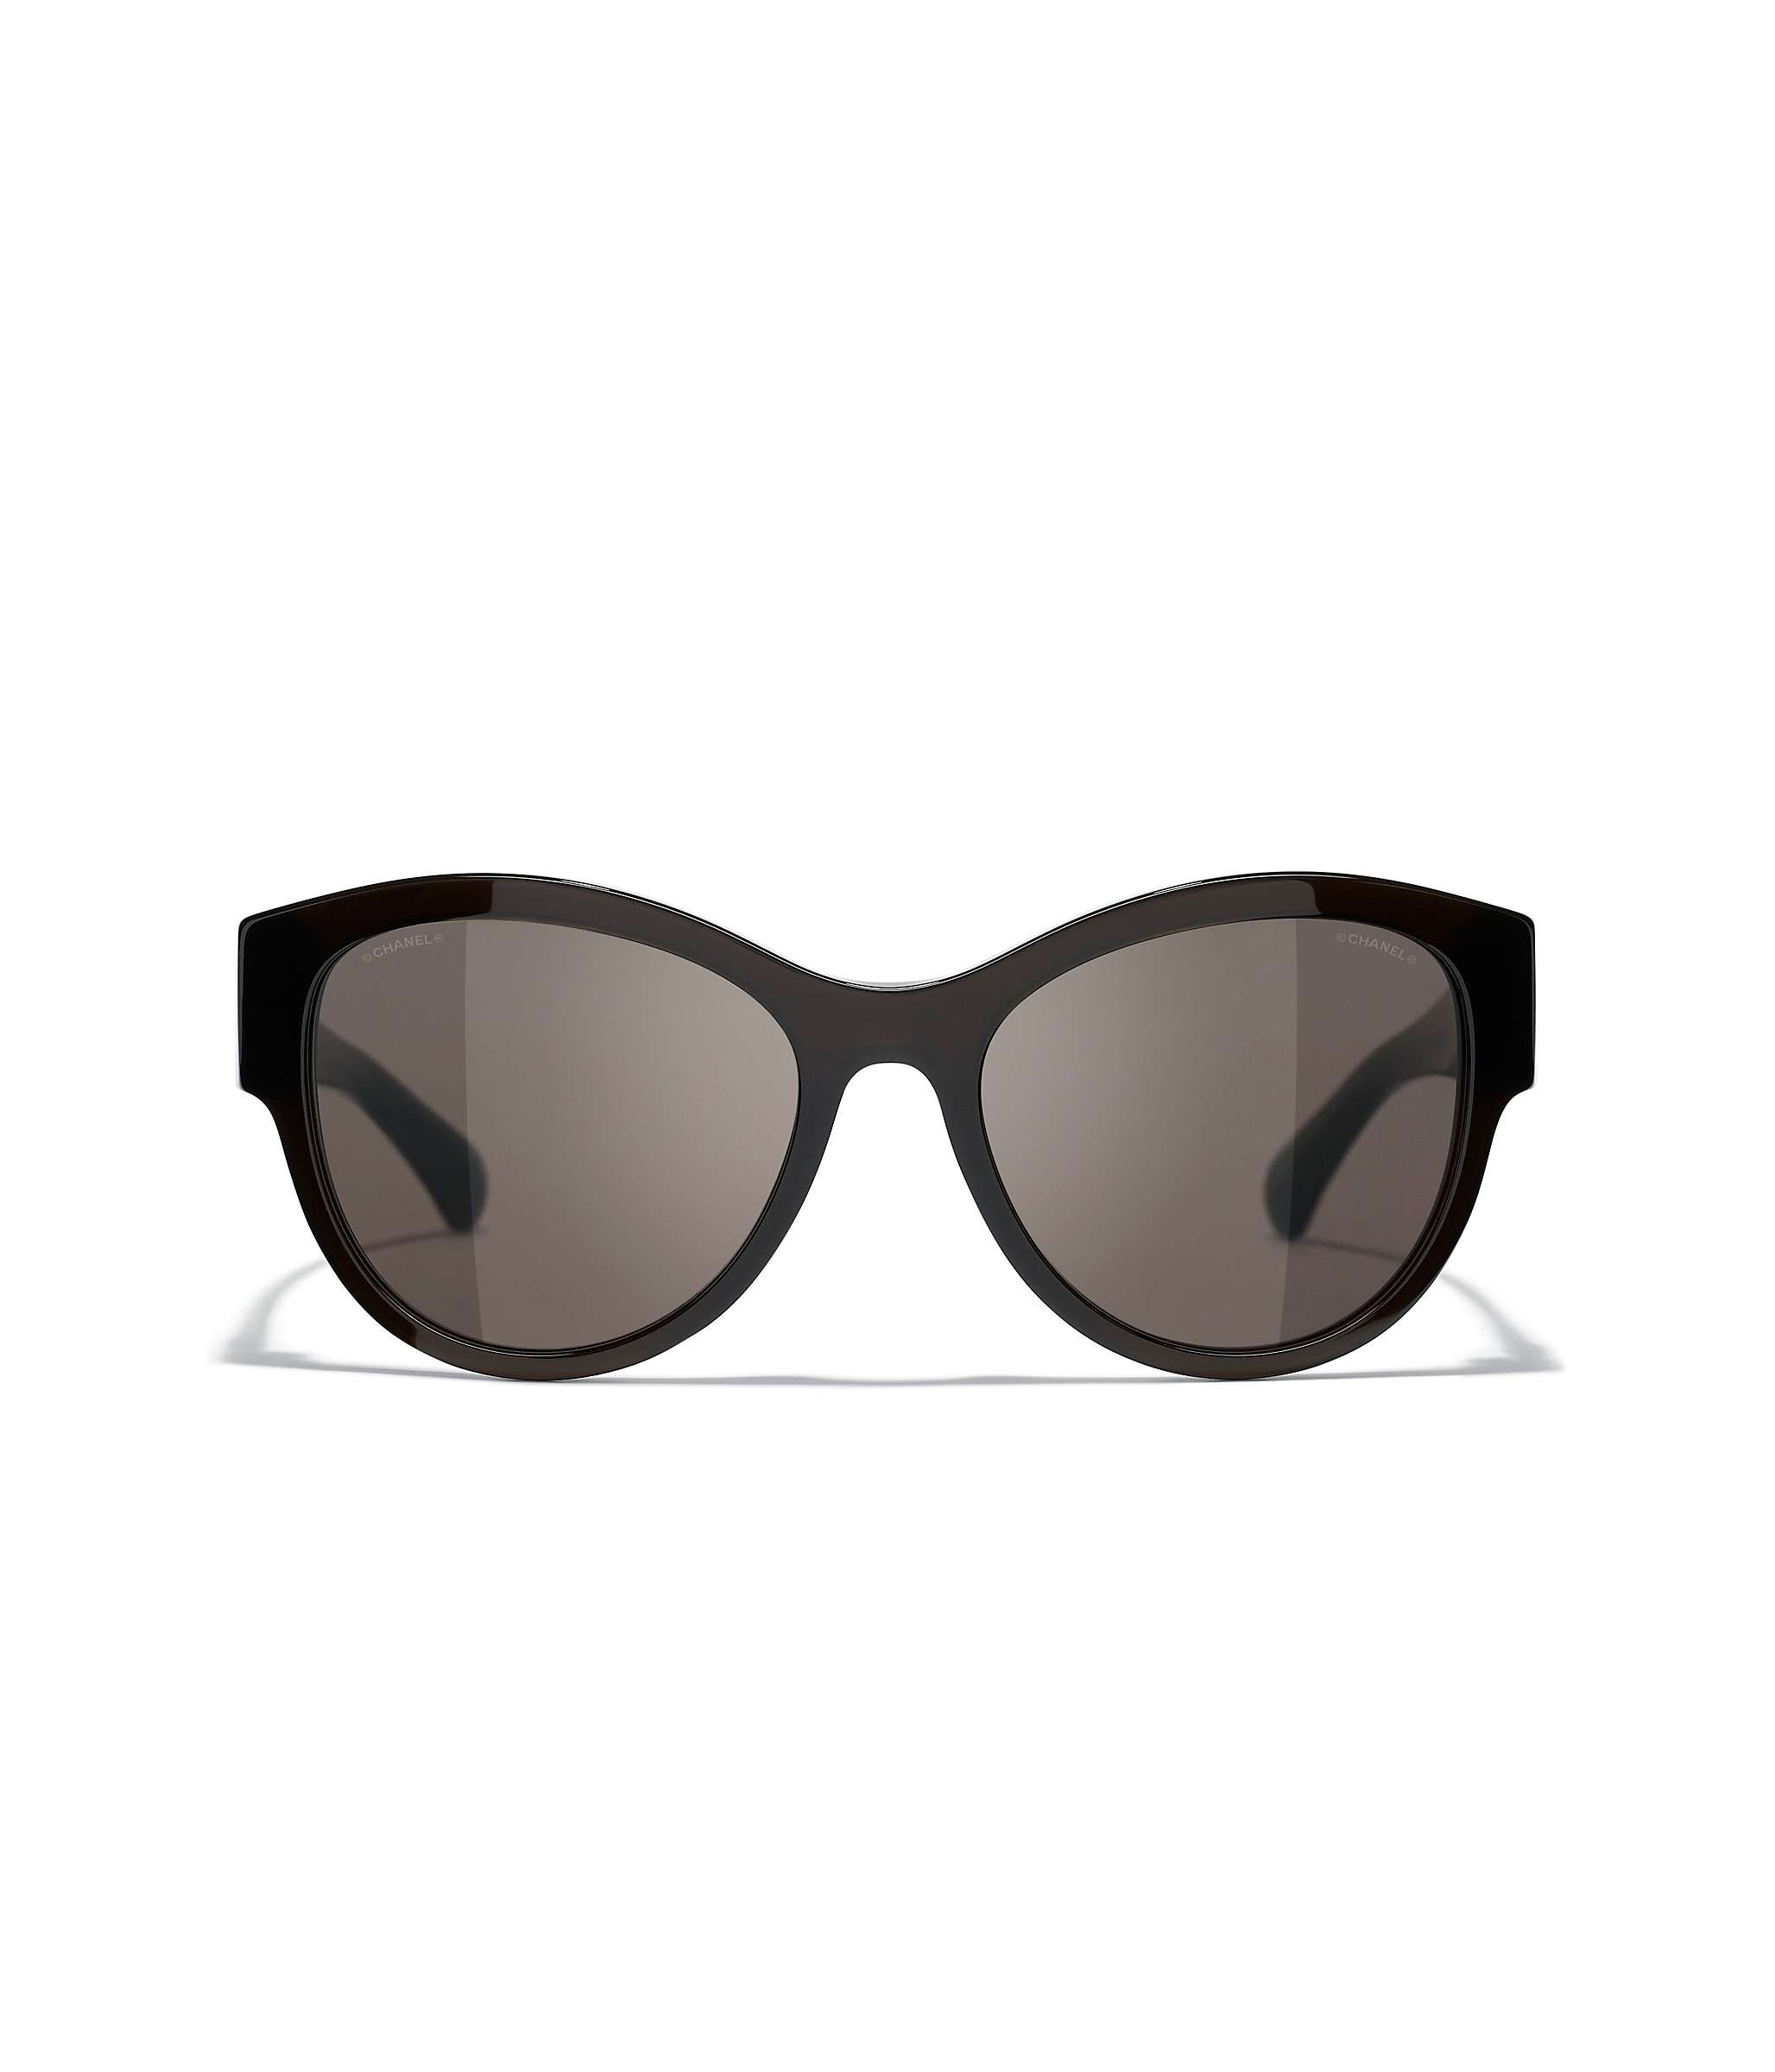 CHANEL Oval Sunglasses CH5434 Black/Brown at John Lewis & Partners